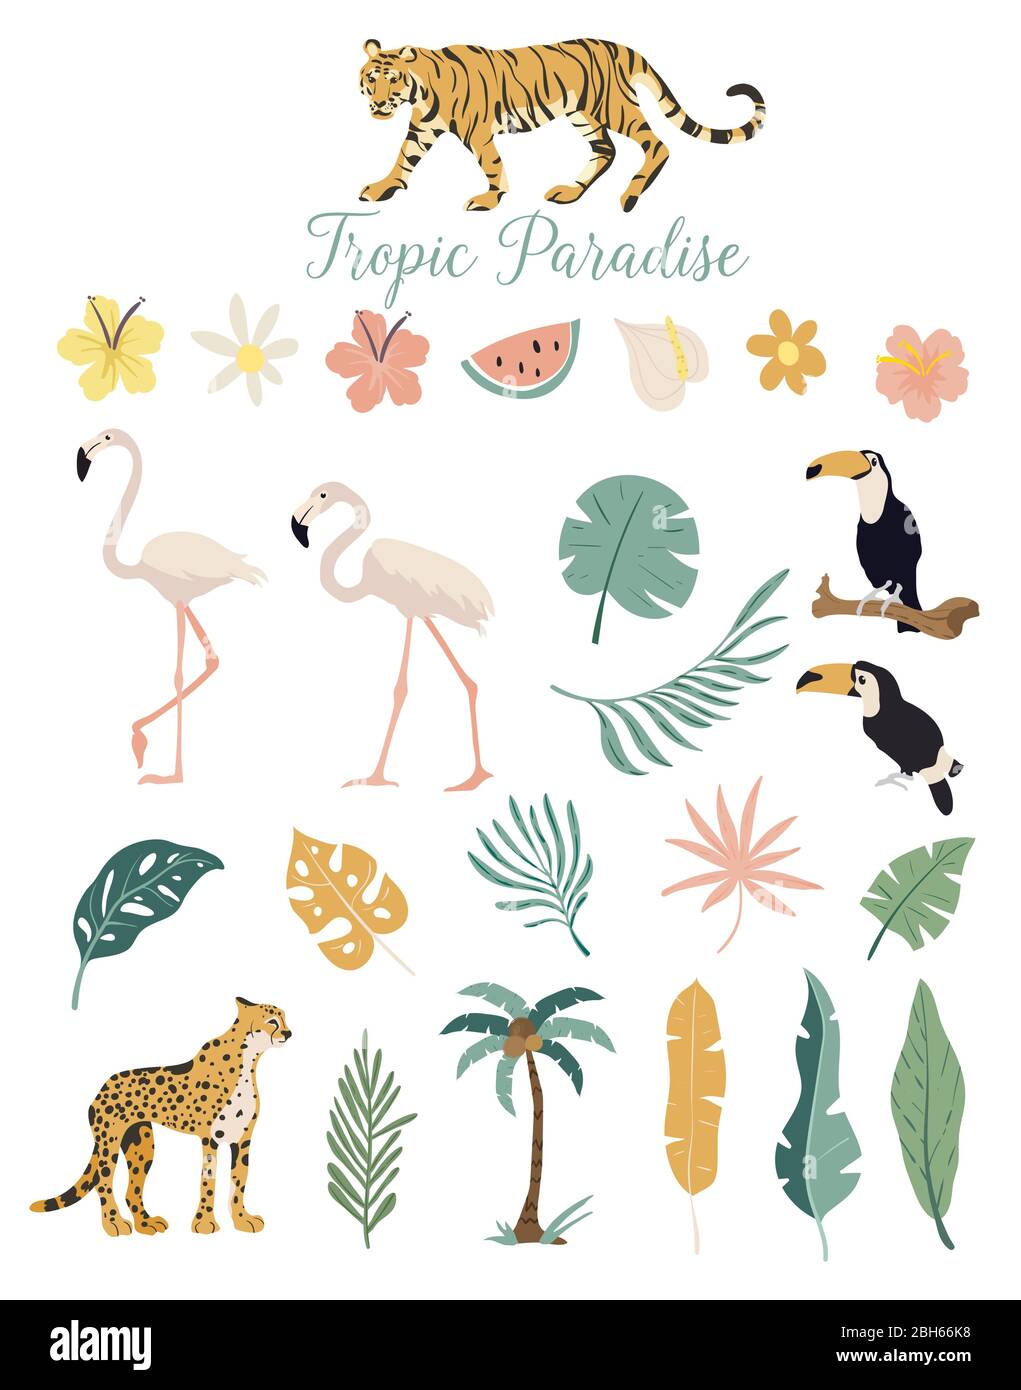 Tropic paradise animals flowers and plants. Vector set of tropical leaves. Palm, monstera, banana leaf, hibiscus, plumeria flowers. Stock Vector